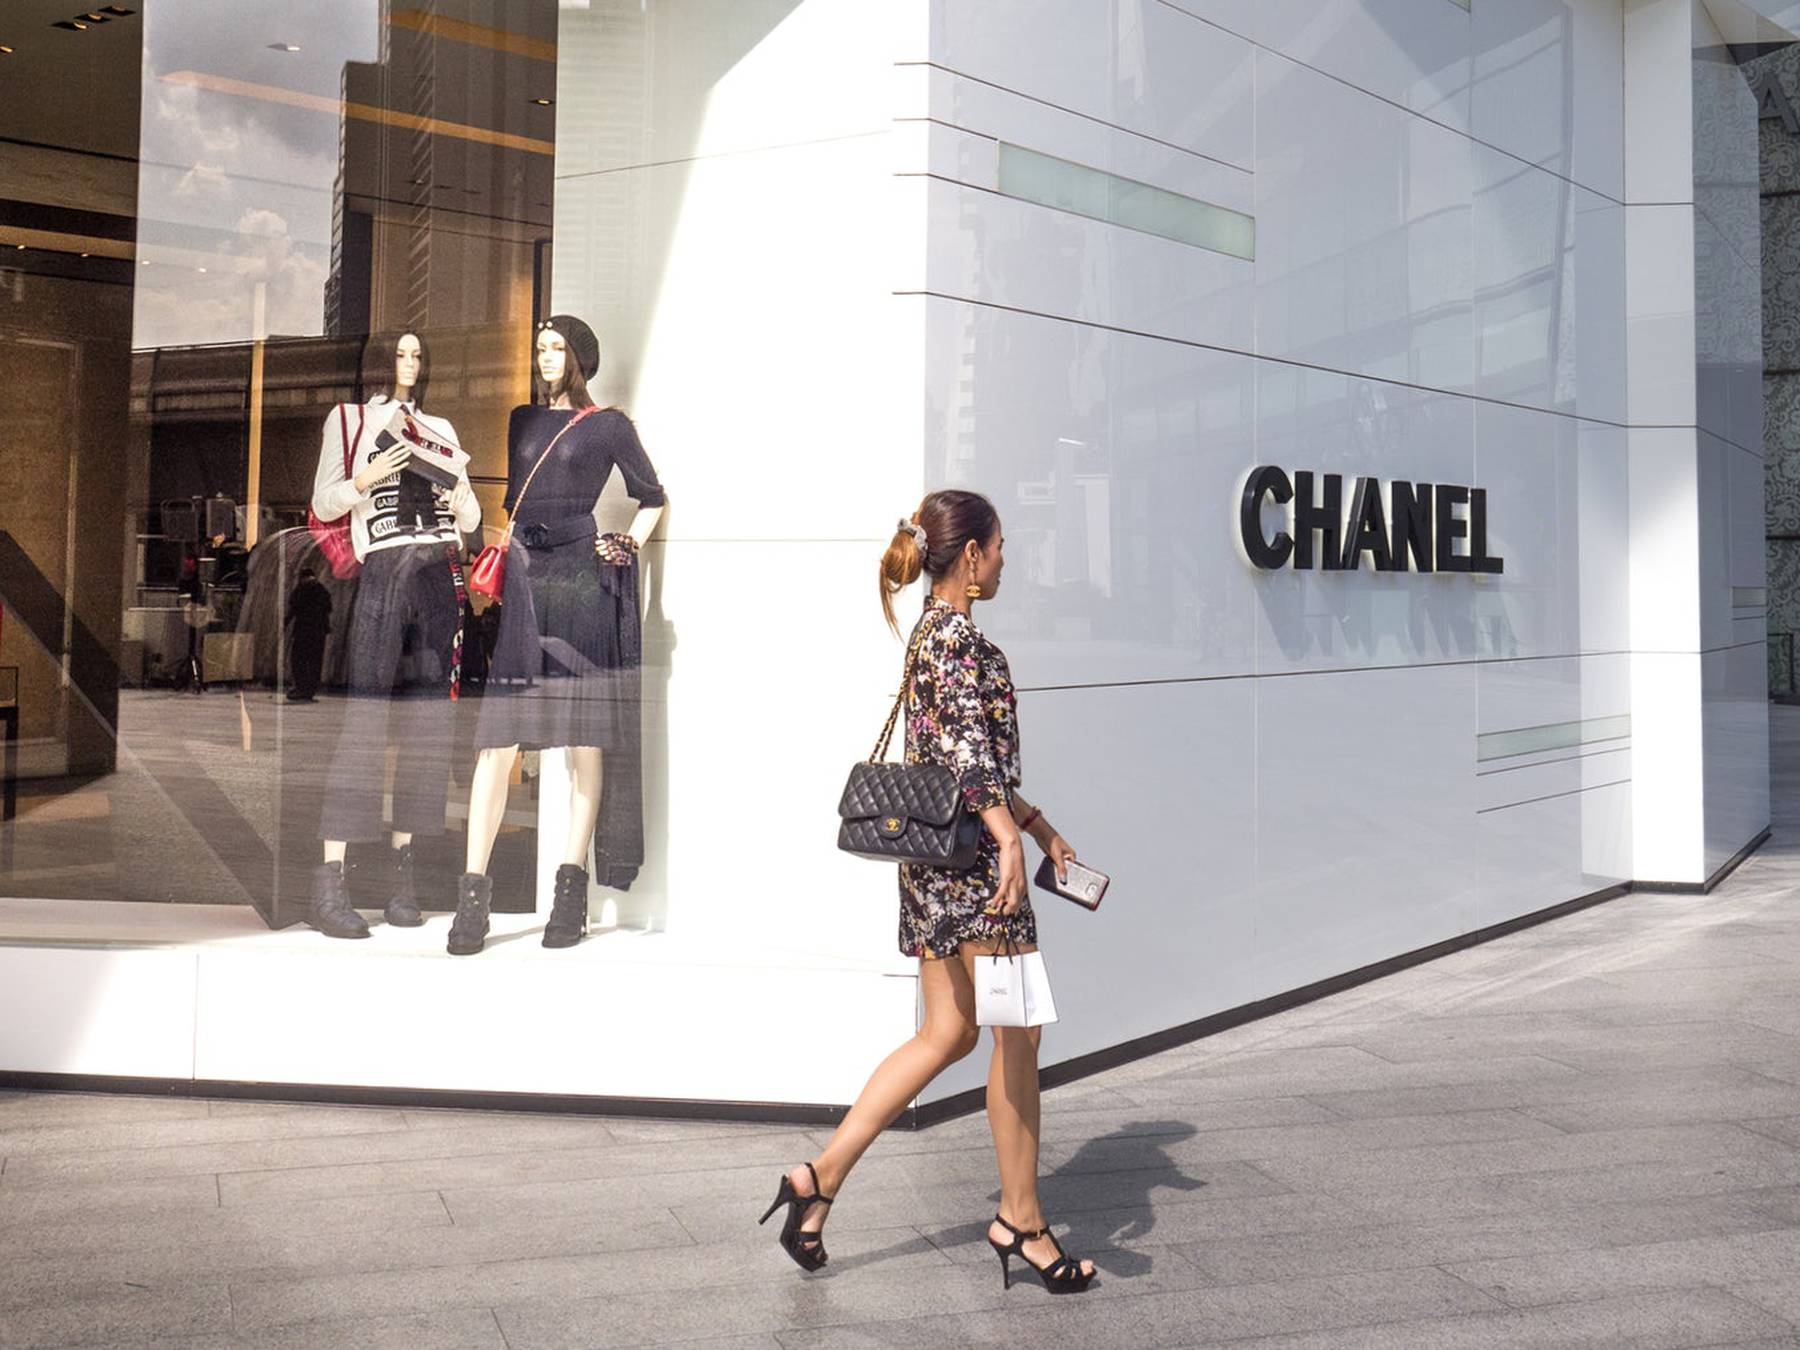 Chanel and Gucci Hike Prices as South Korea and China End Dispute